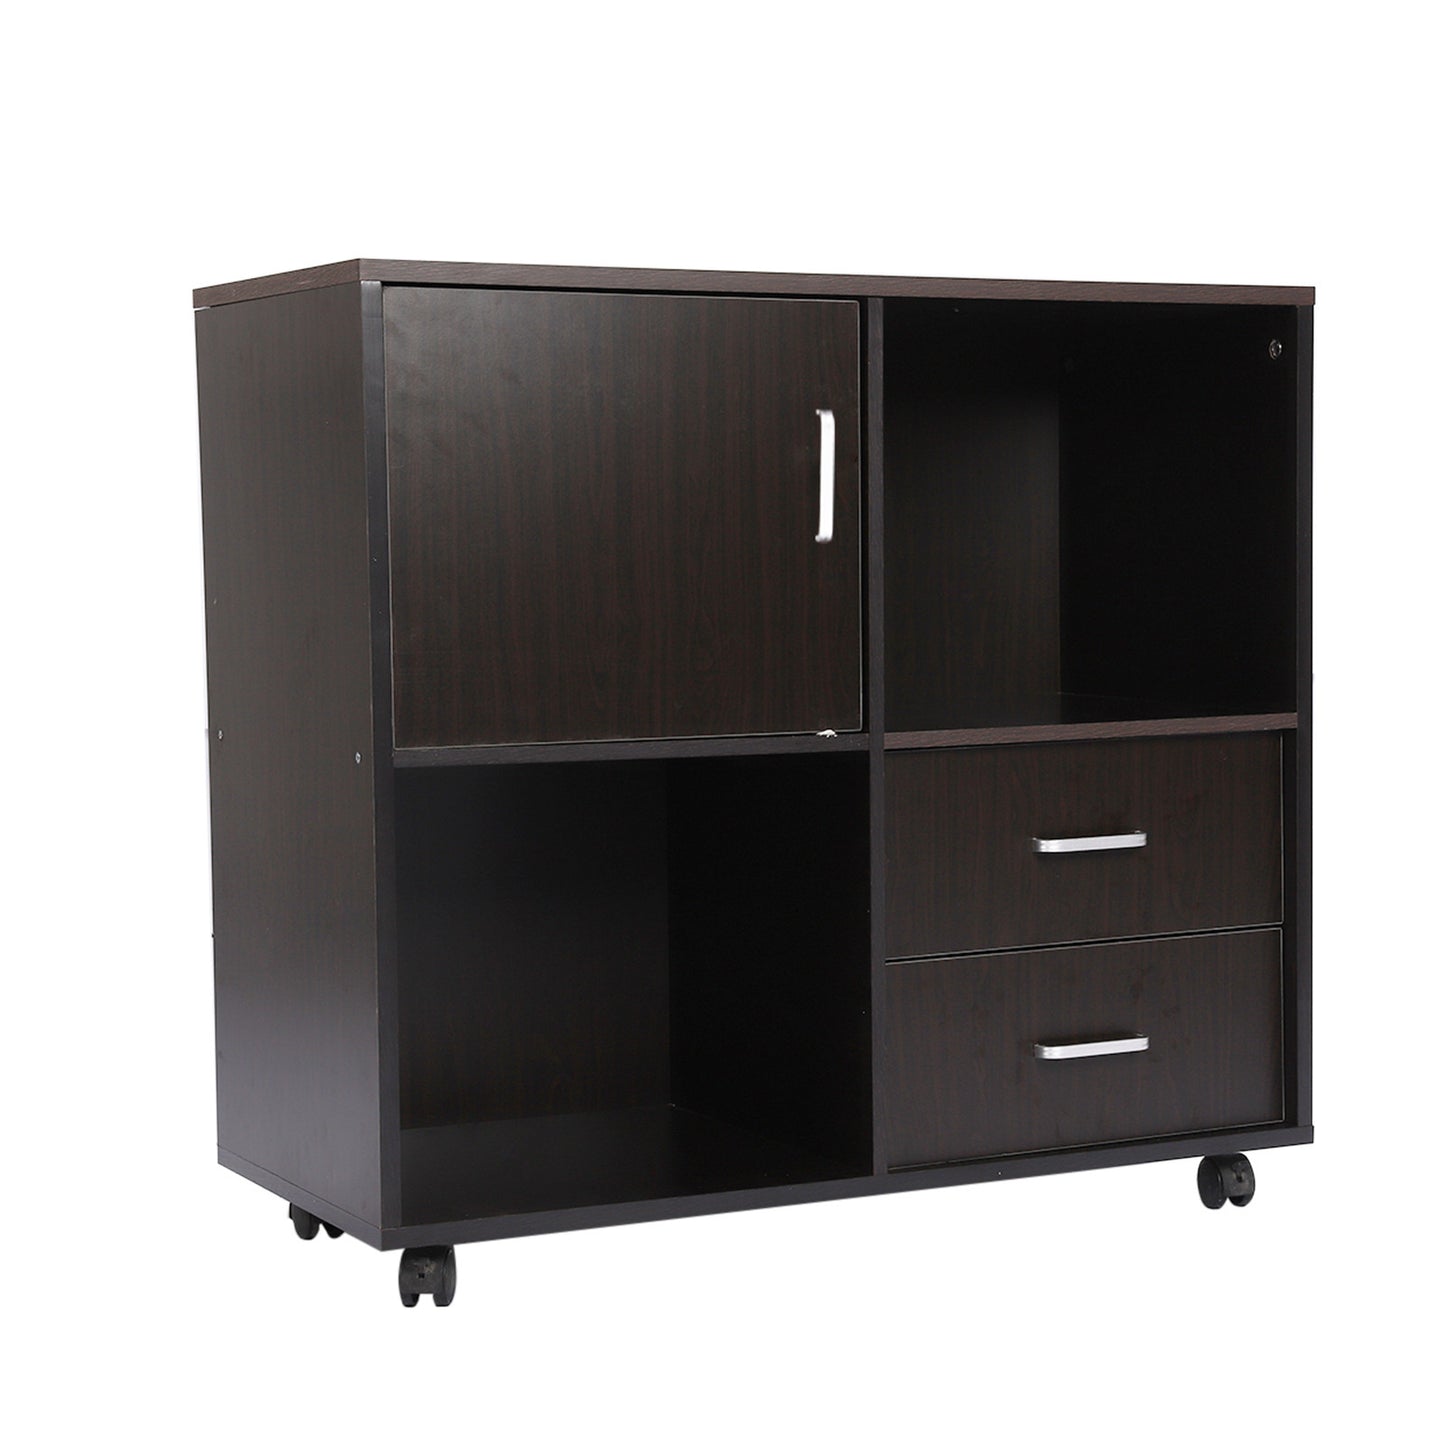 File Cabinet Mobile Lateral Filing Cabinet with Wheels Modern Printer Stand